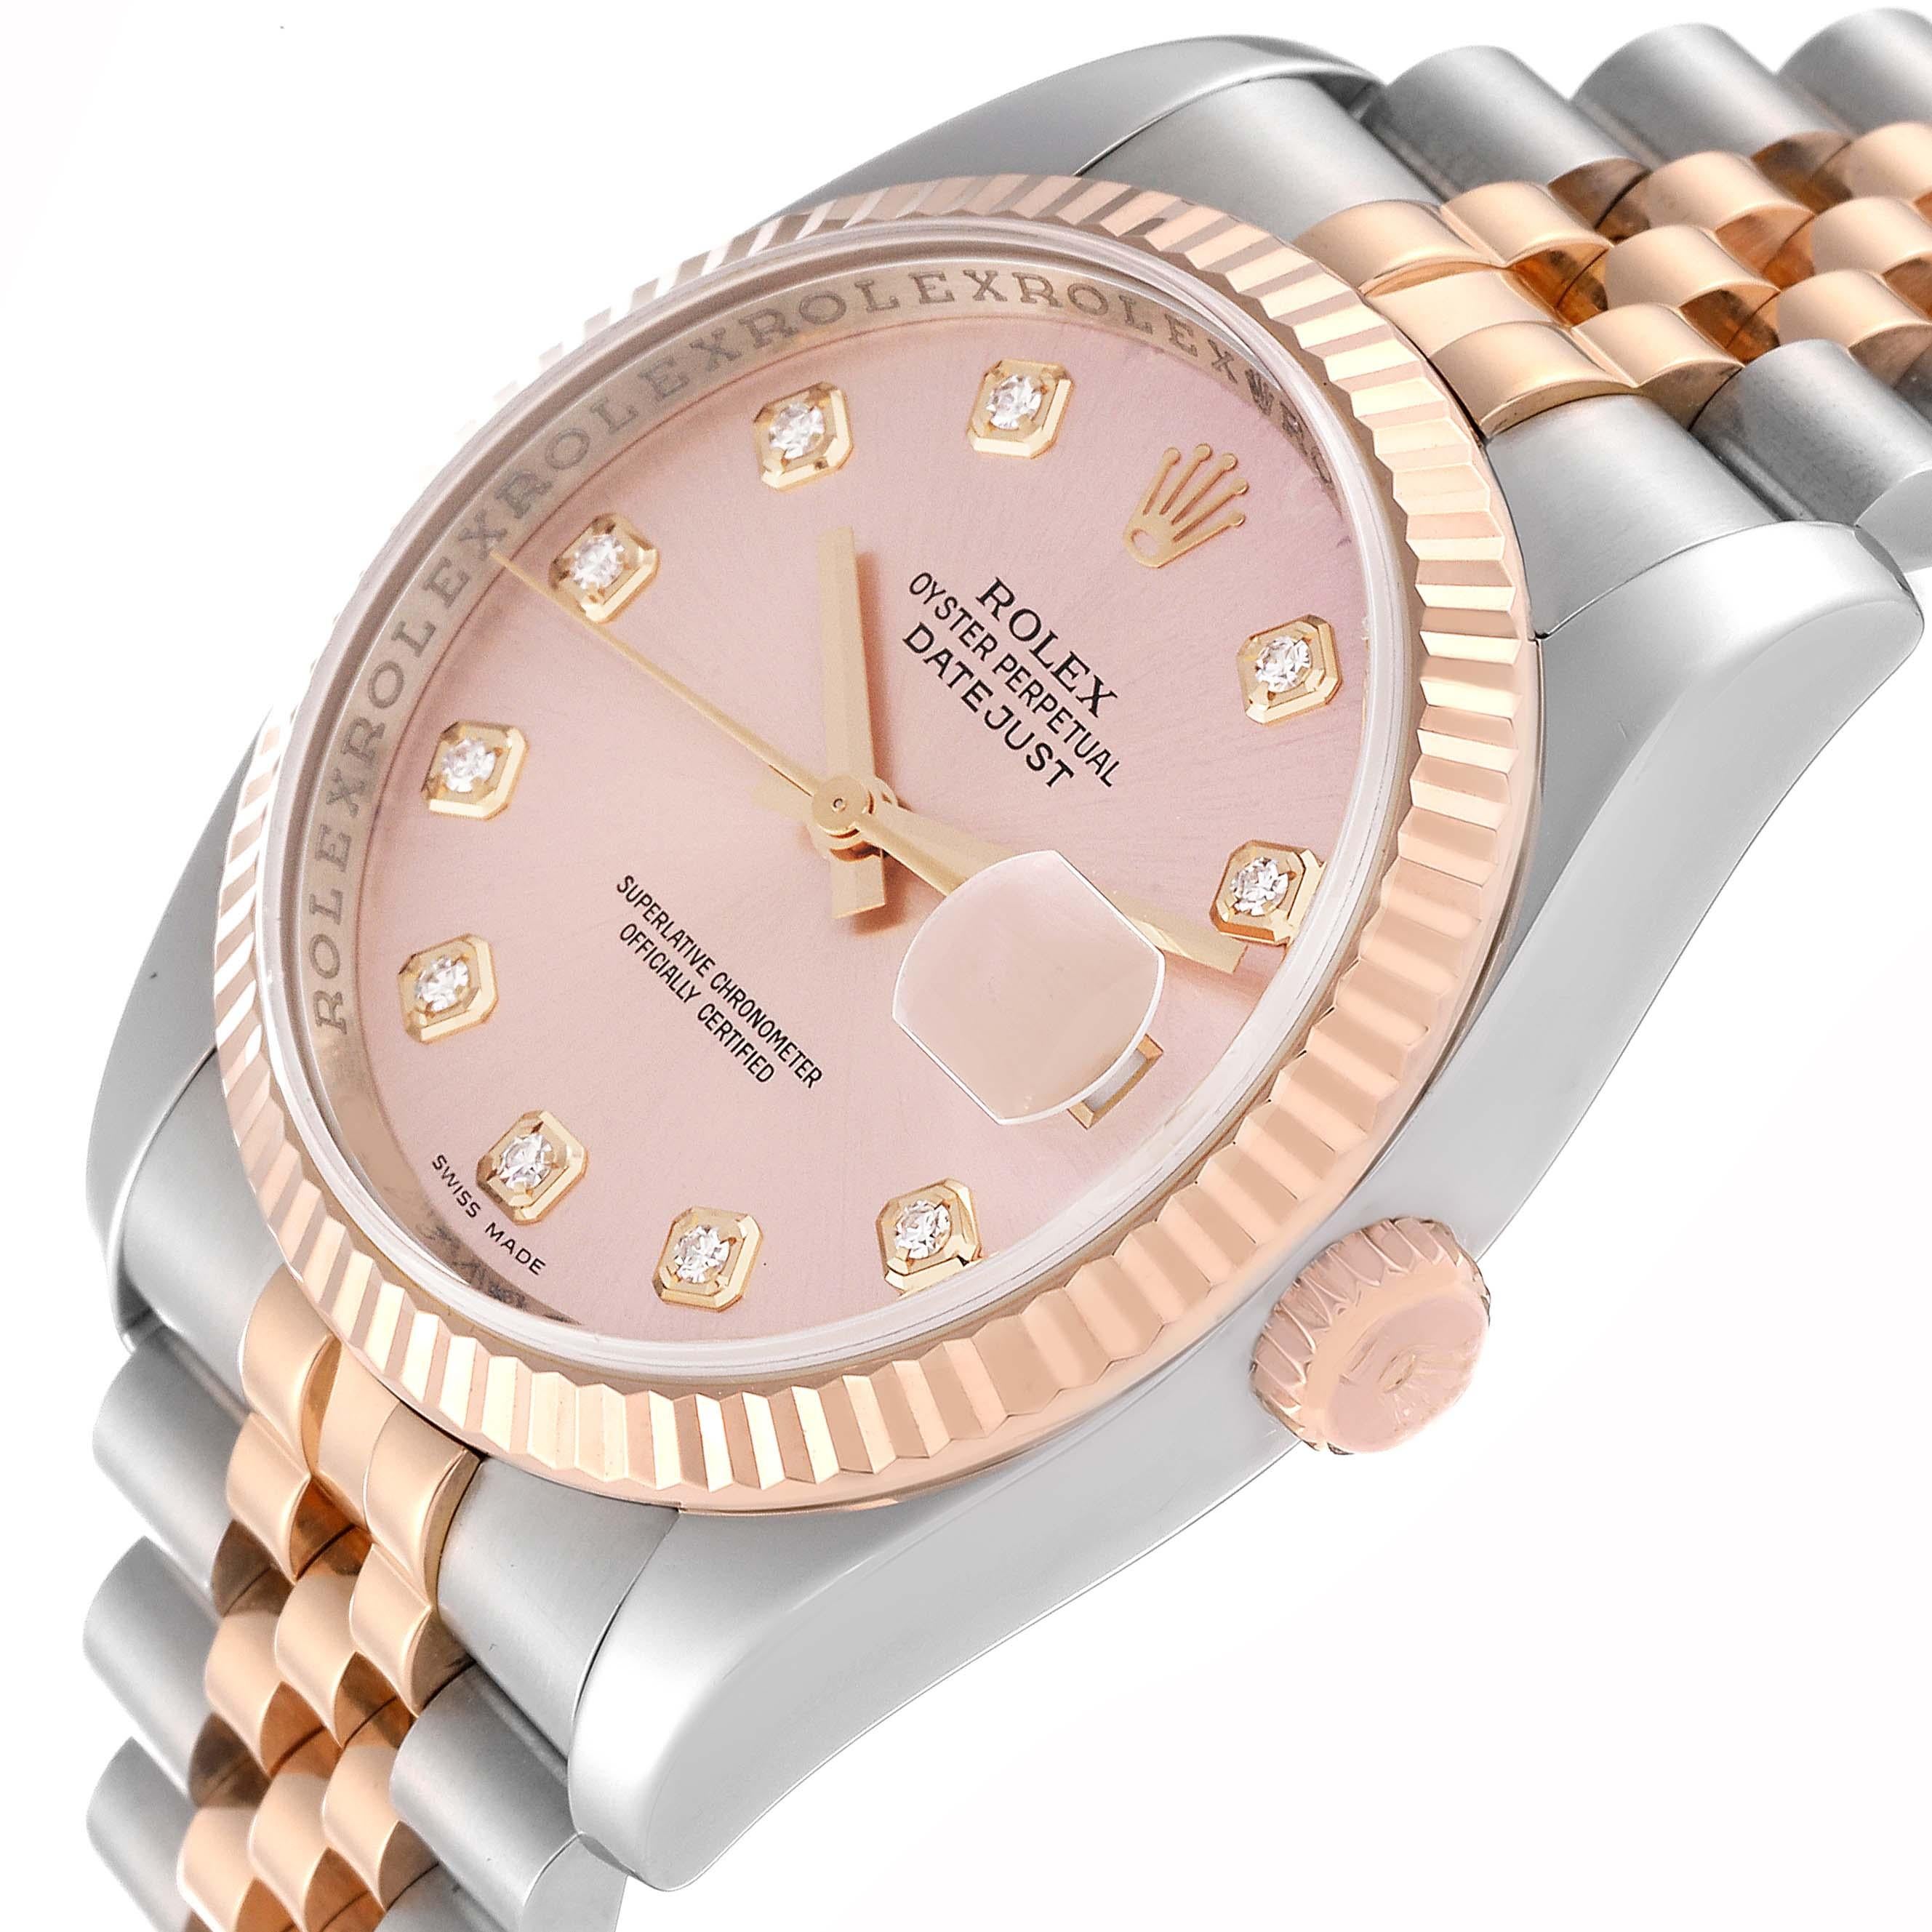 Rolex Datejust Steel Rose Gold Pink Diamond Dial Mens Watch 116231 For Sale 3